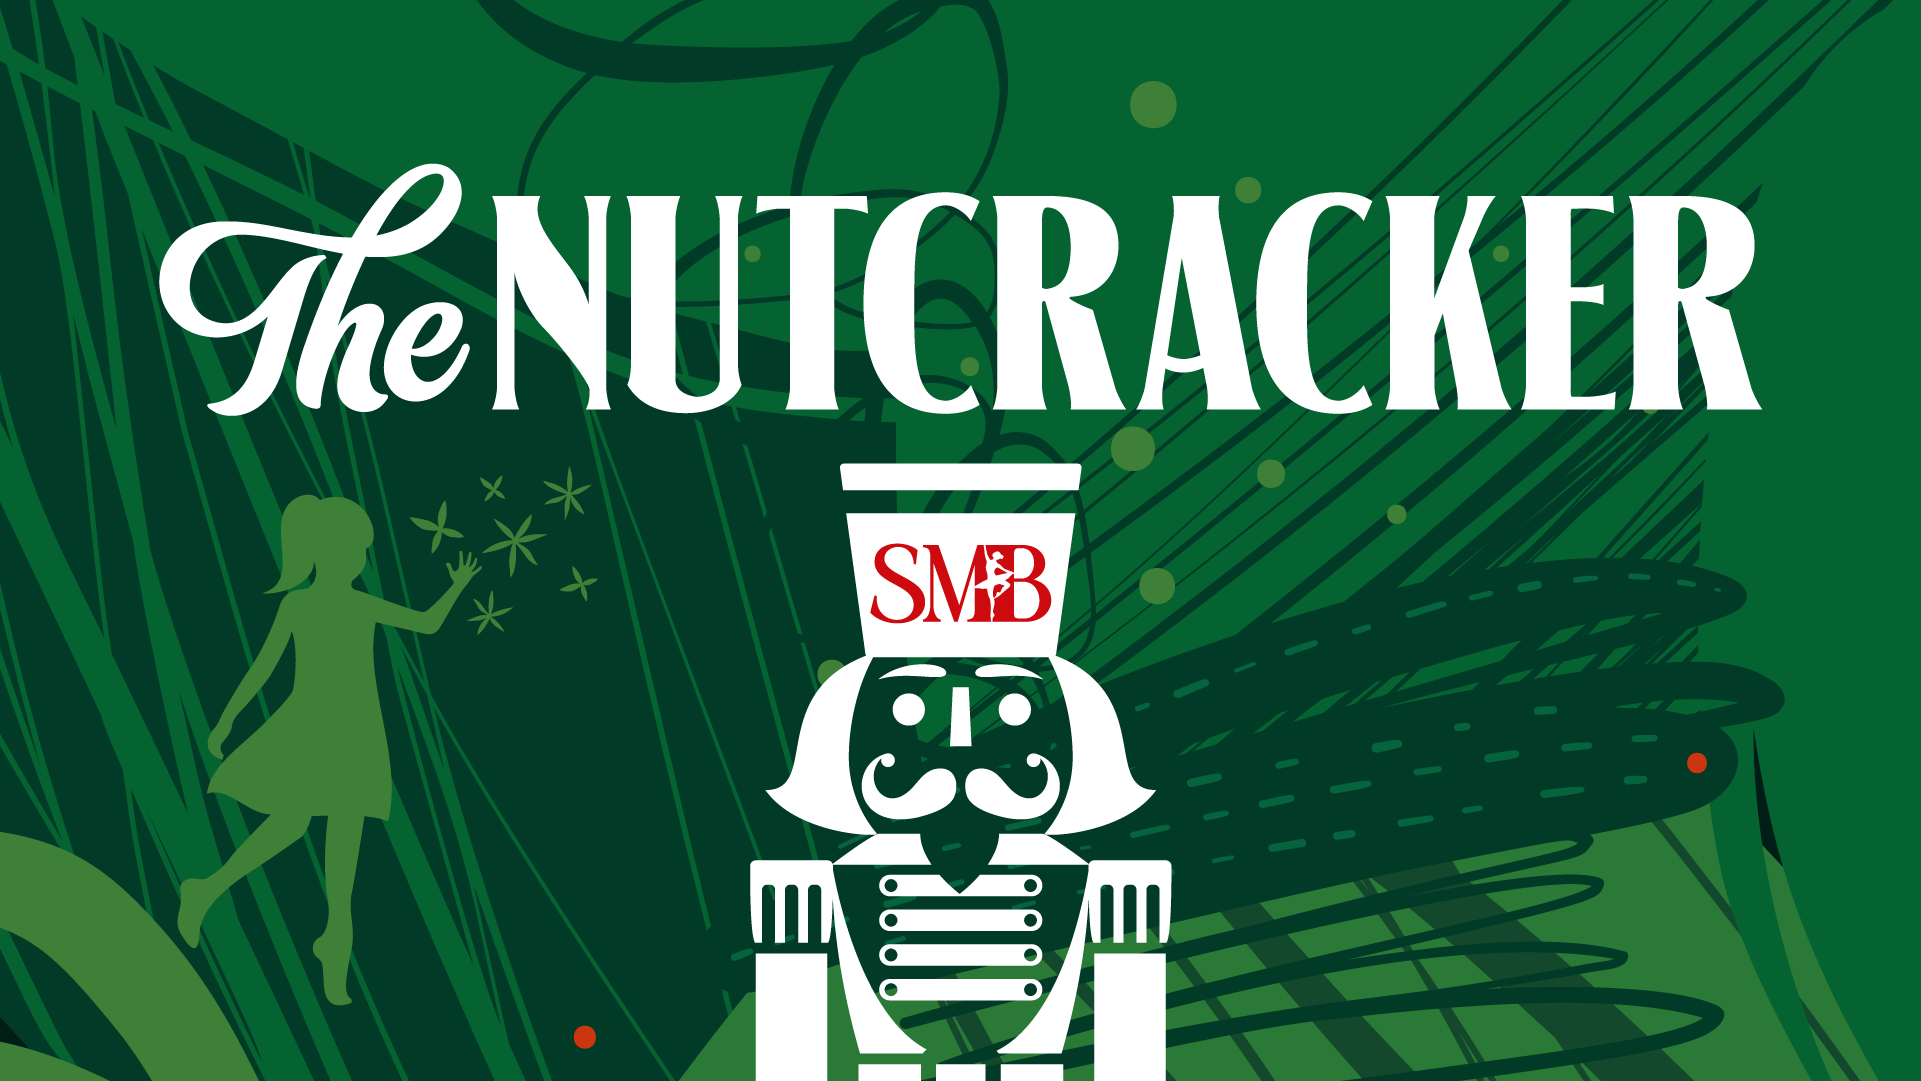 In white text: The Nutcracker, over a green background with holiday ornamentation.